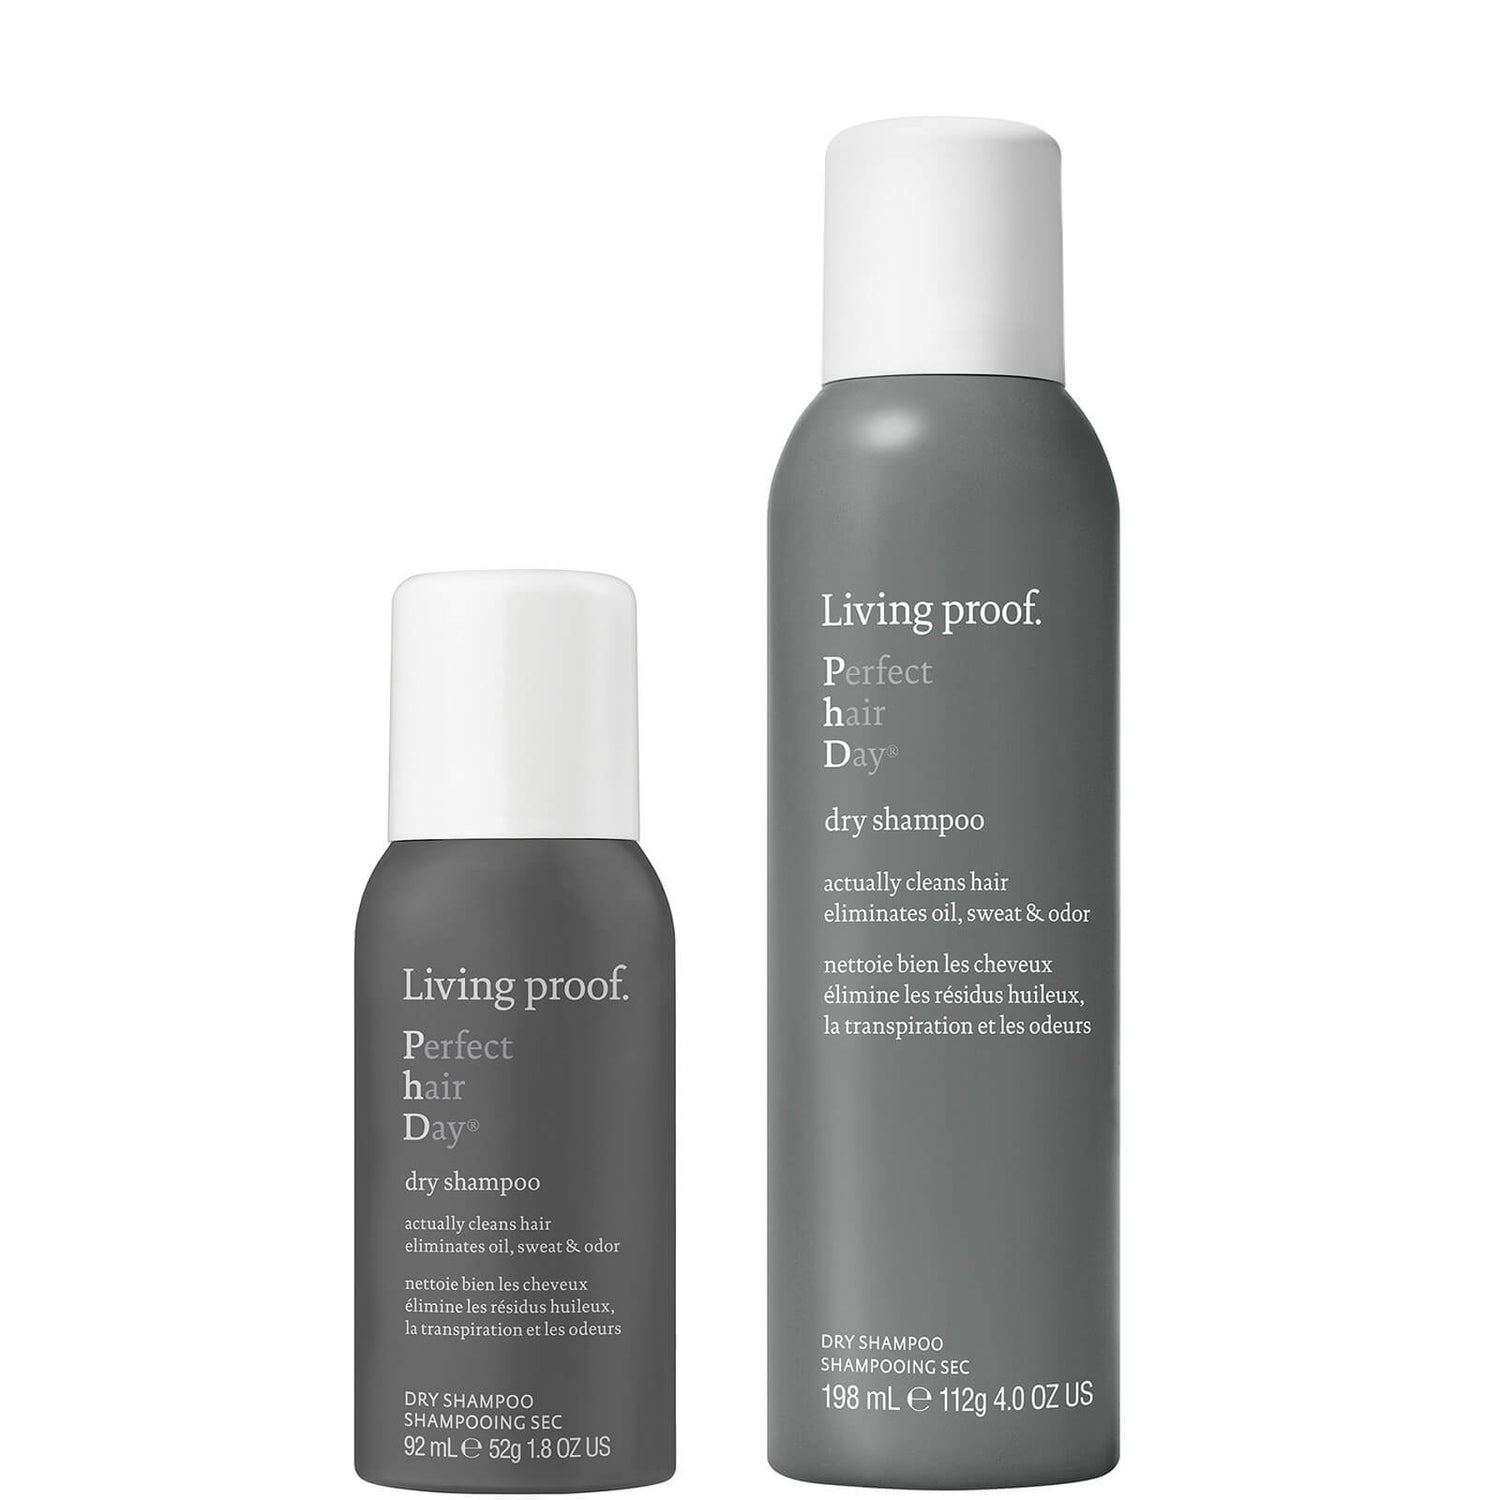 Living Proof Perfect Hair Day (PhD) Dry Shampoo Gift Set